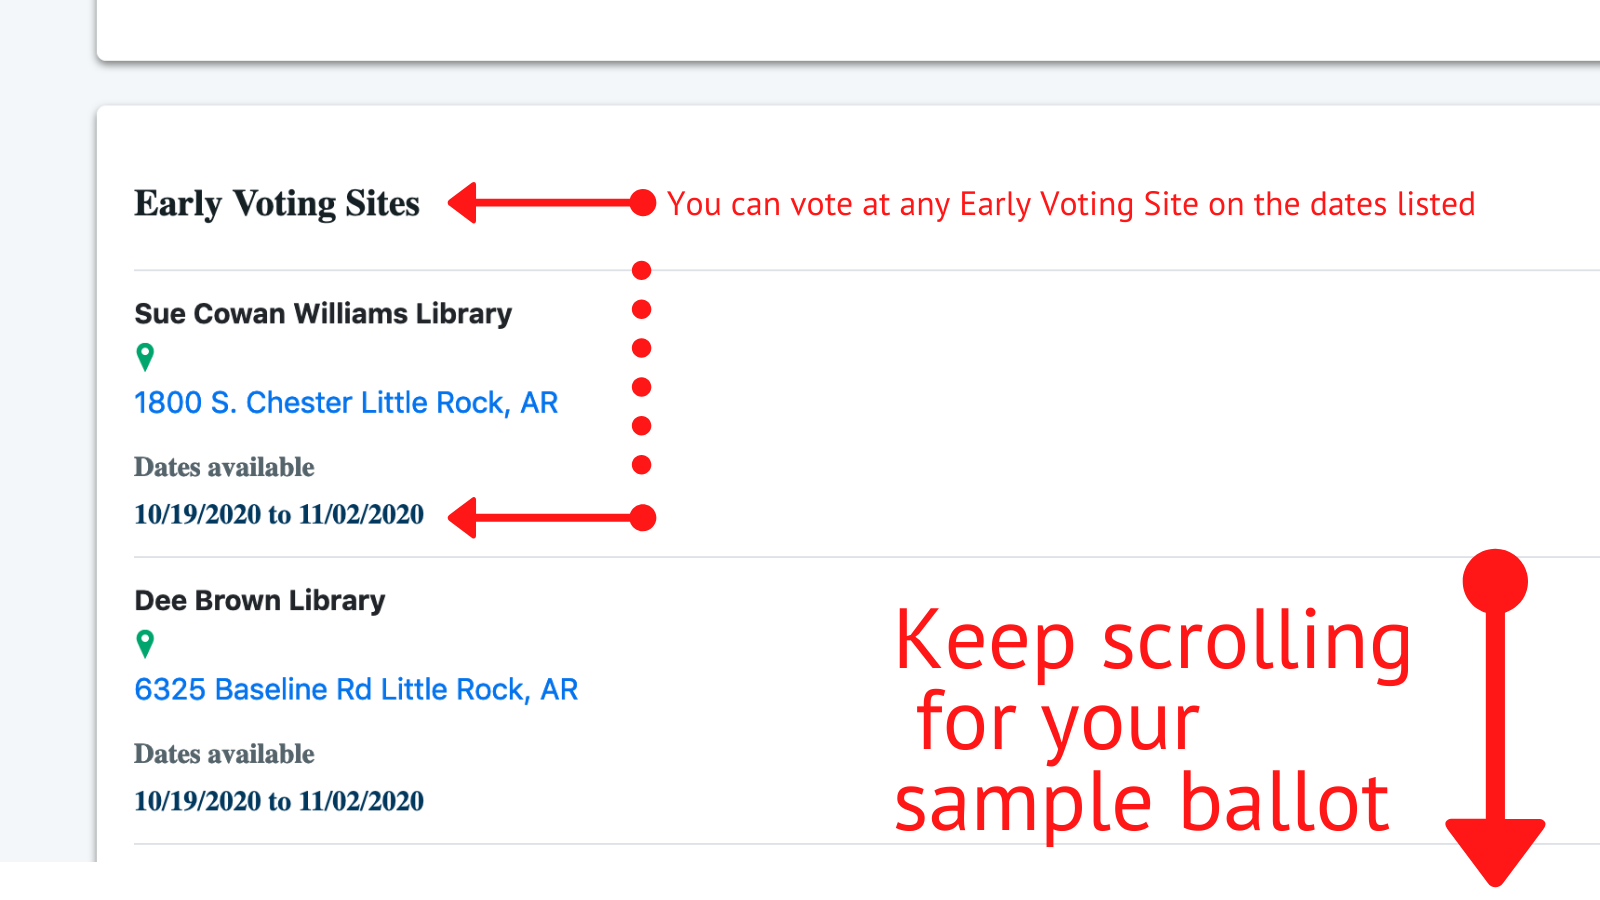 A screenshot of the Arkansas Voter View website, showing a section listing Early Voting Sites.